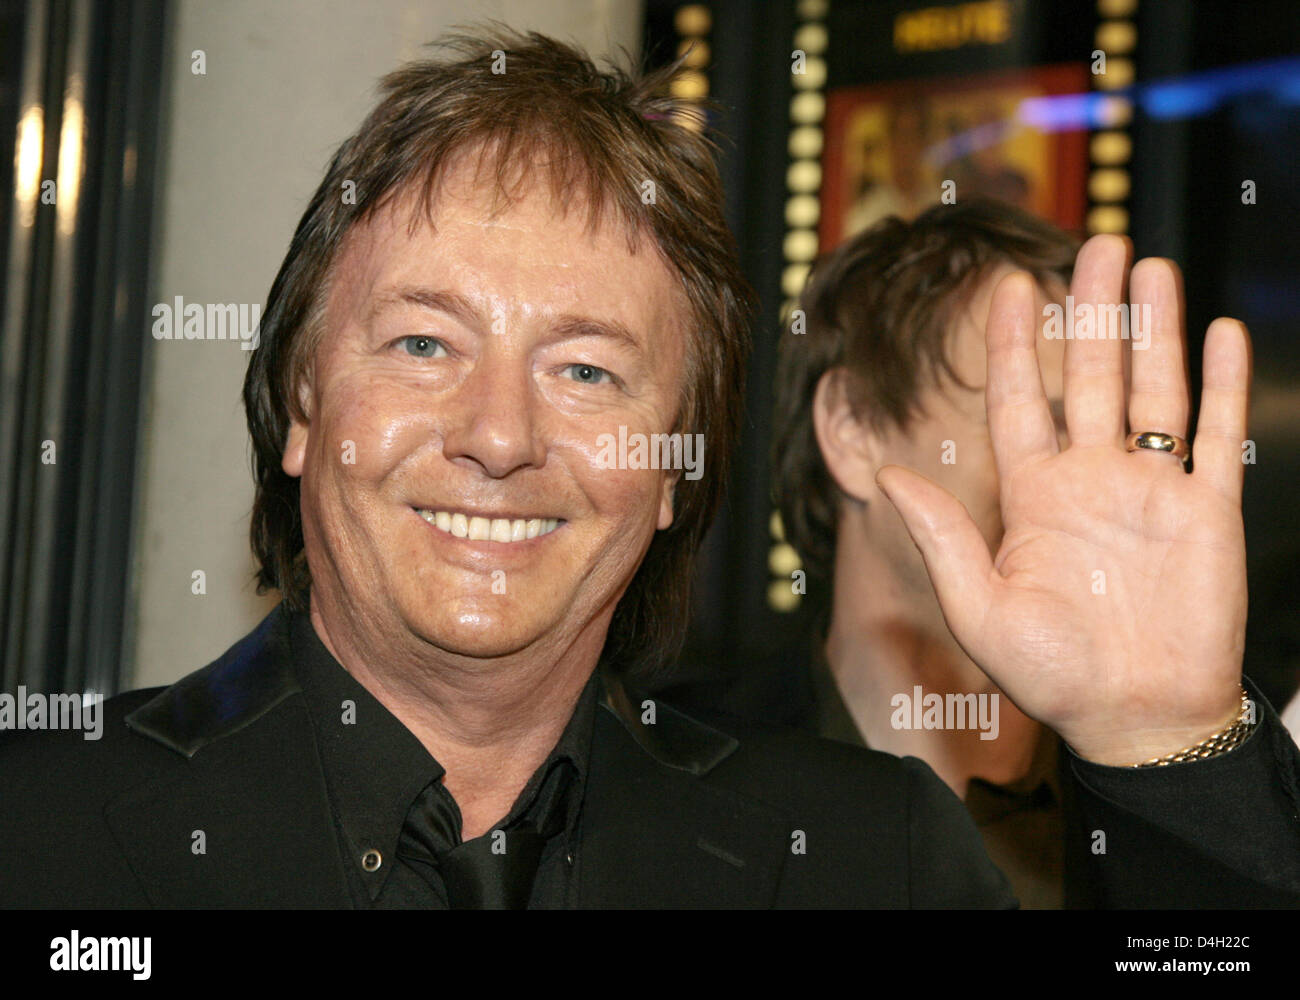 British singer Chris Norman, former singer of the band 'Smokie', greets guests at the premiere of the motion picture 'Selbstgespraeche ('Come in and Burn Out') at 'Kulturbrauerei' cinema in Berlin, Germany, 31 July 2008. Chris Norman has a guest role in the film portraying the situation in a call centre. The film will be shown at German cincemas from 31 July 2008 onwards. Photo: Je Stock Photo